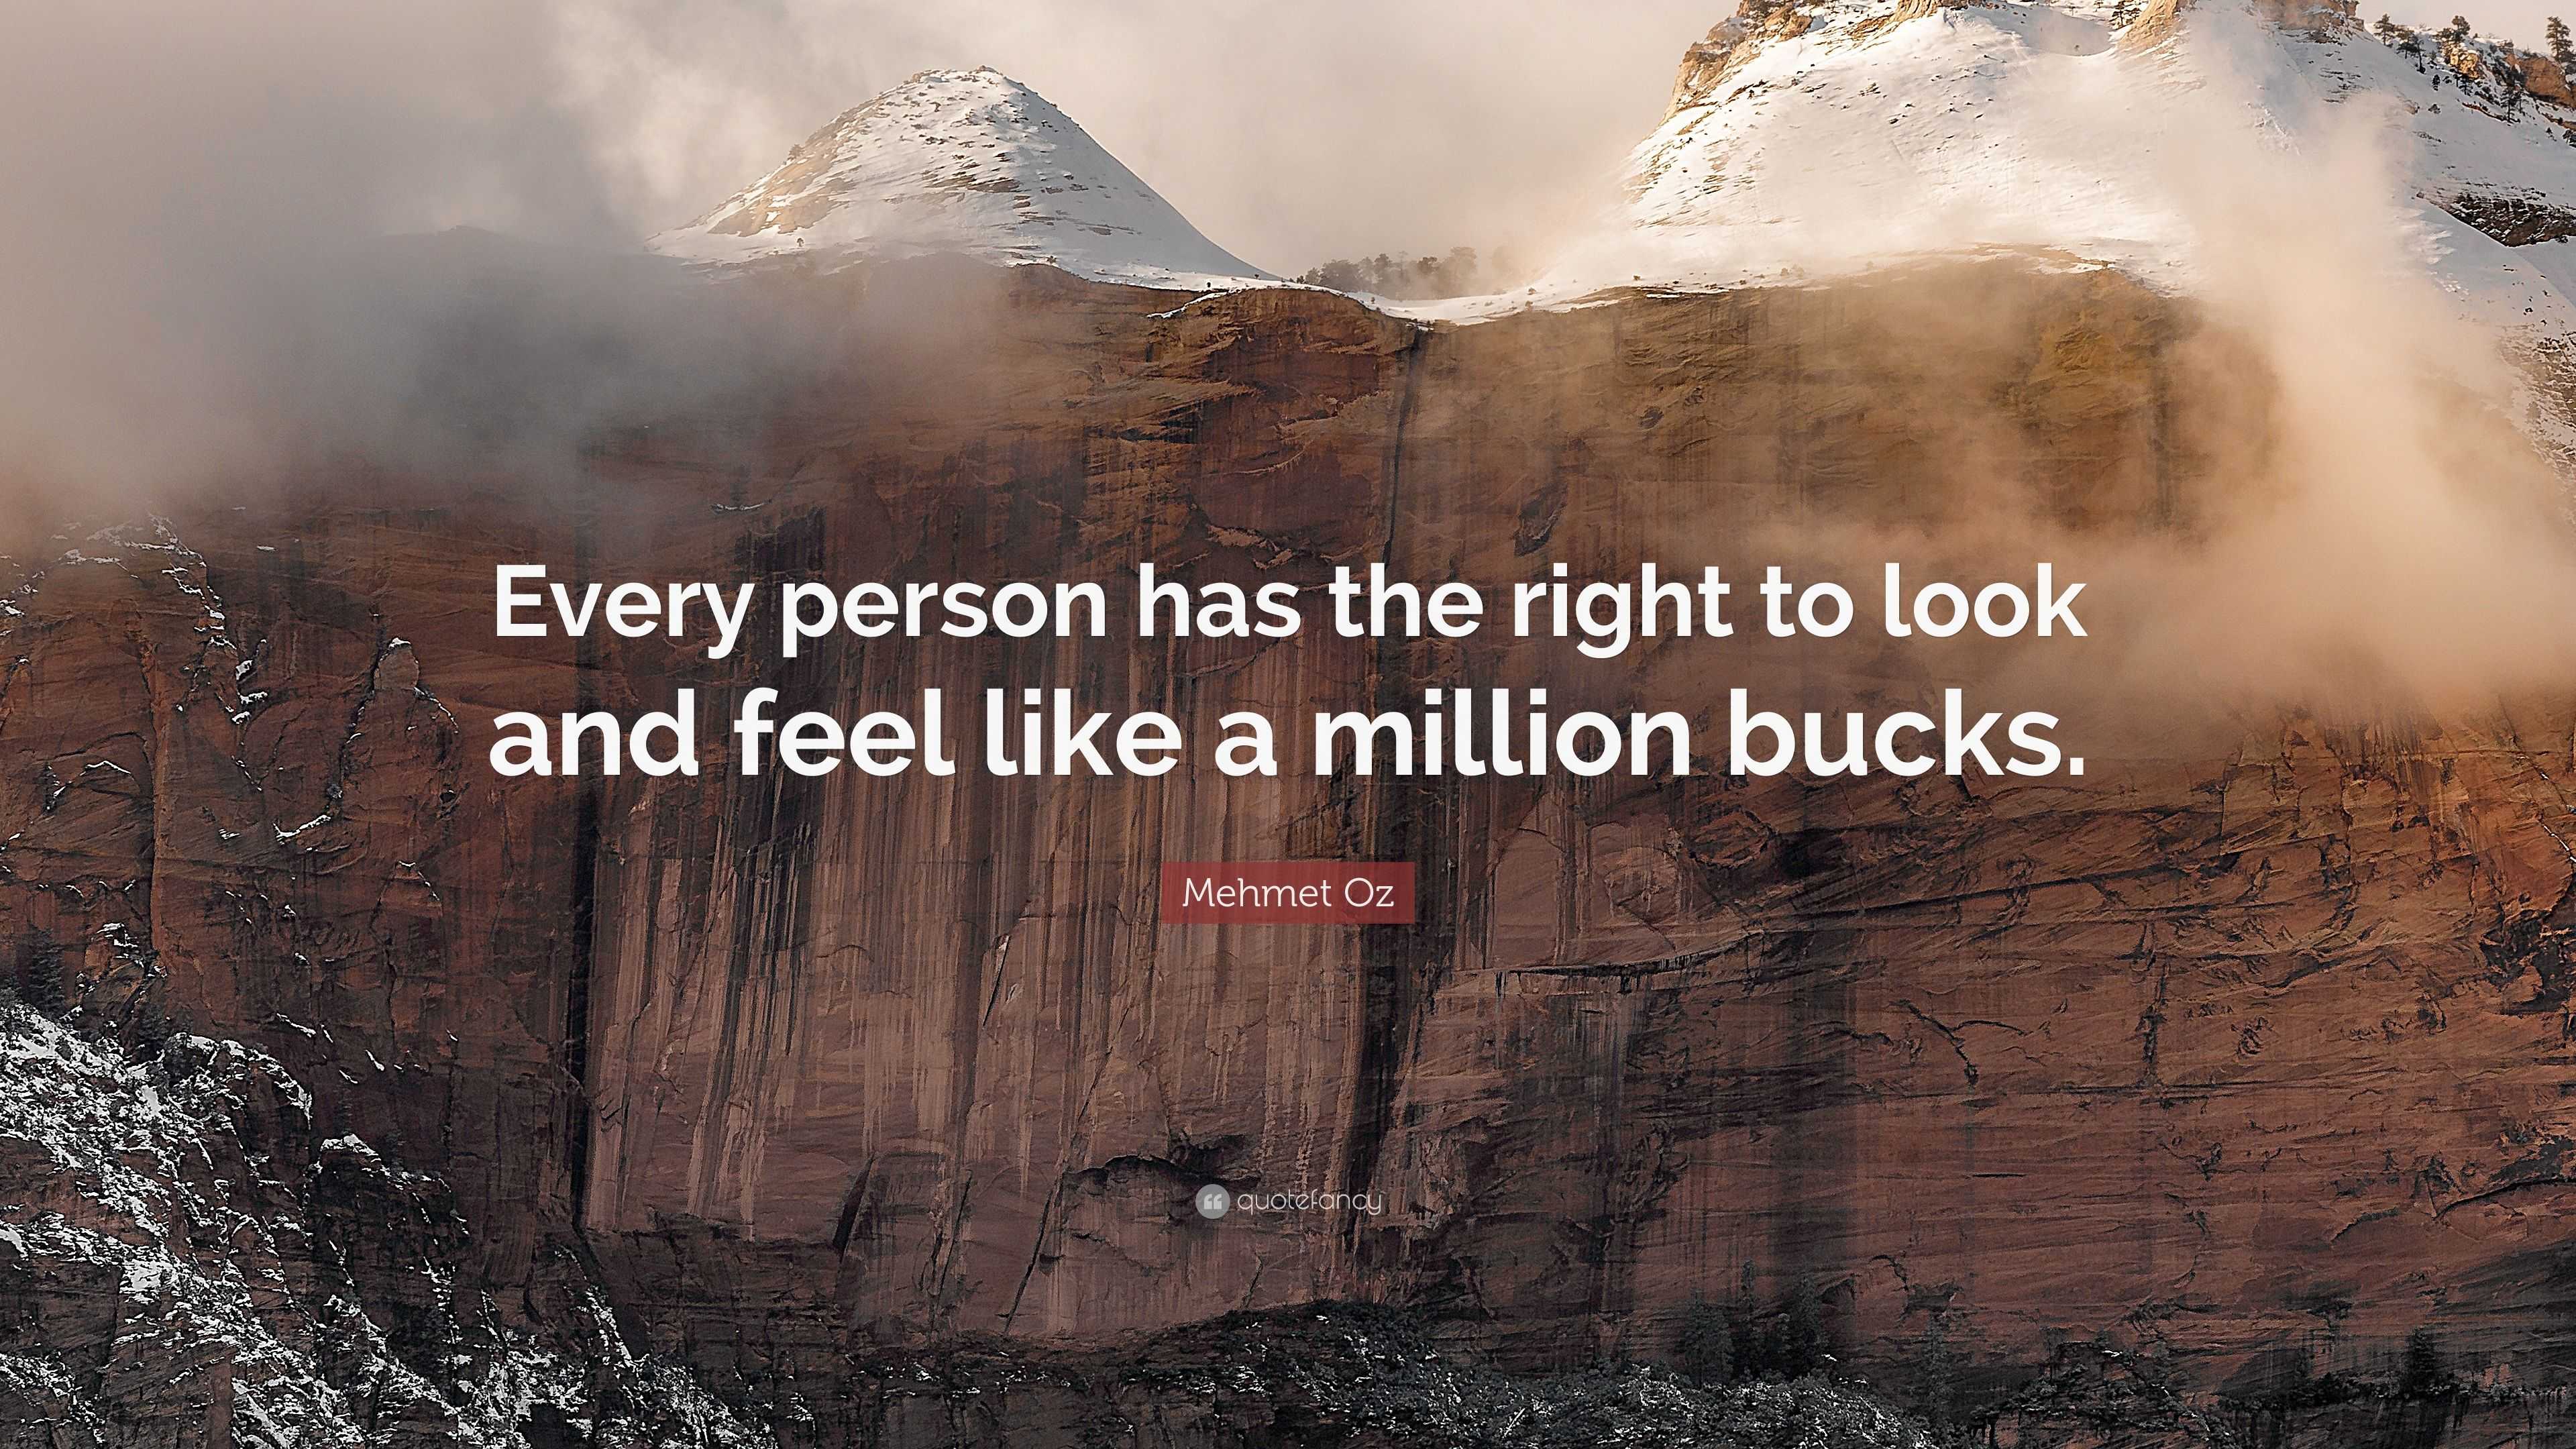 Mehmet Oz Quote “every Person Has The Right To Look And Feel Like A Million Bucks”